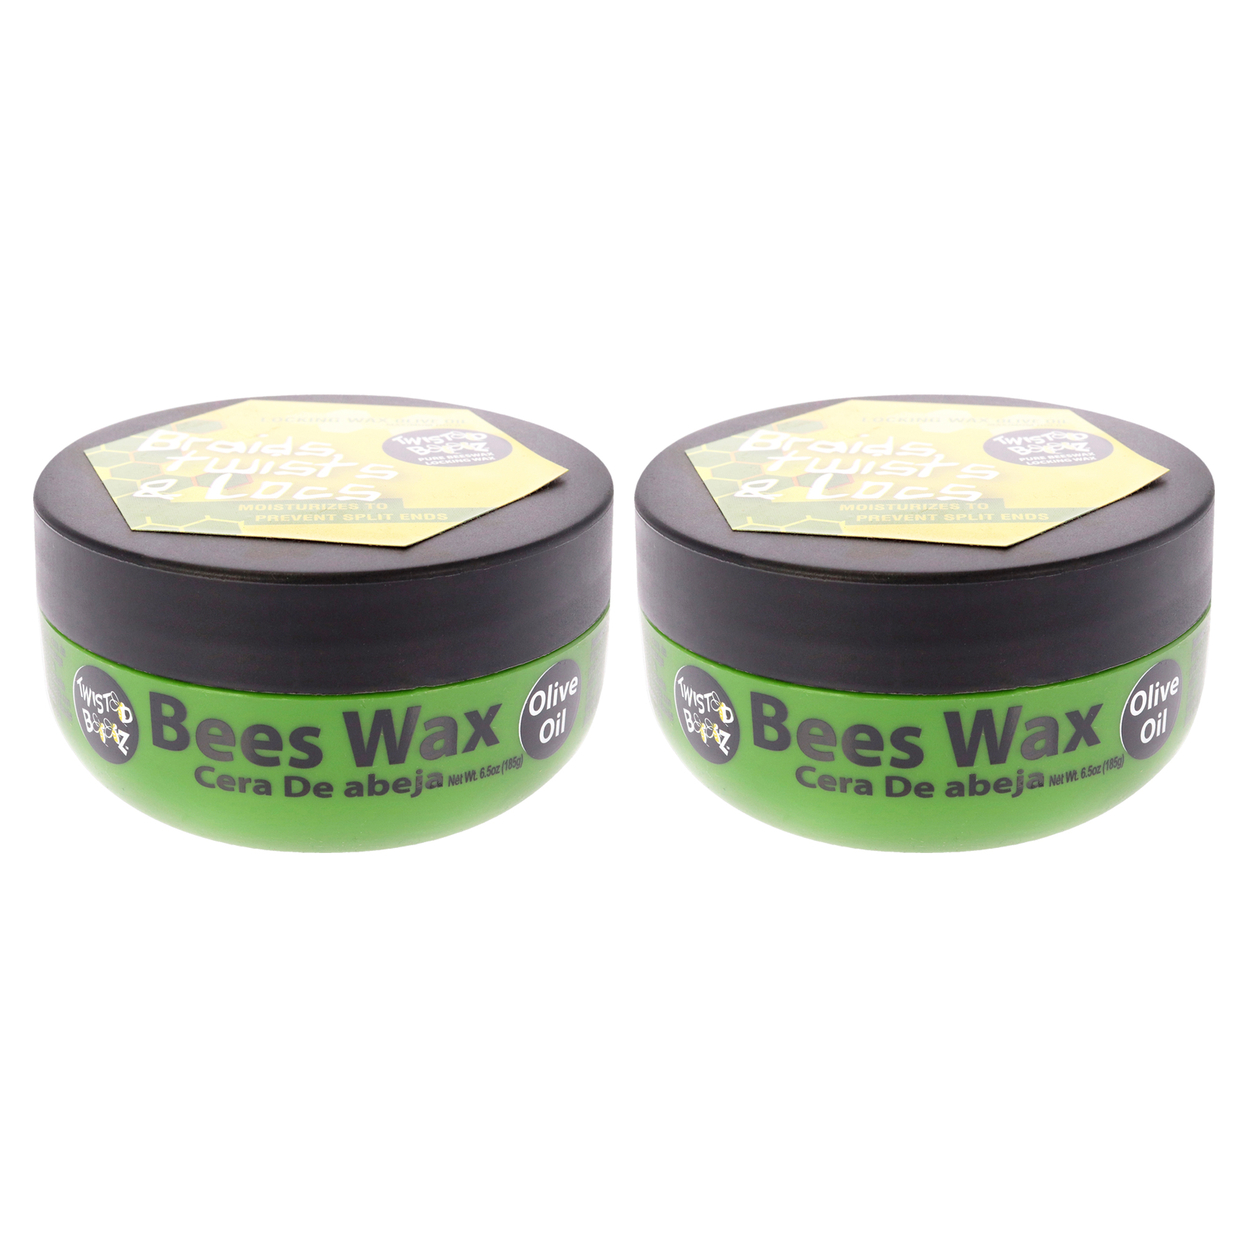 Ecoco Twisted Bees Wax - Olive Oil - Pack Of 2 6.5 Oz